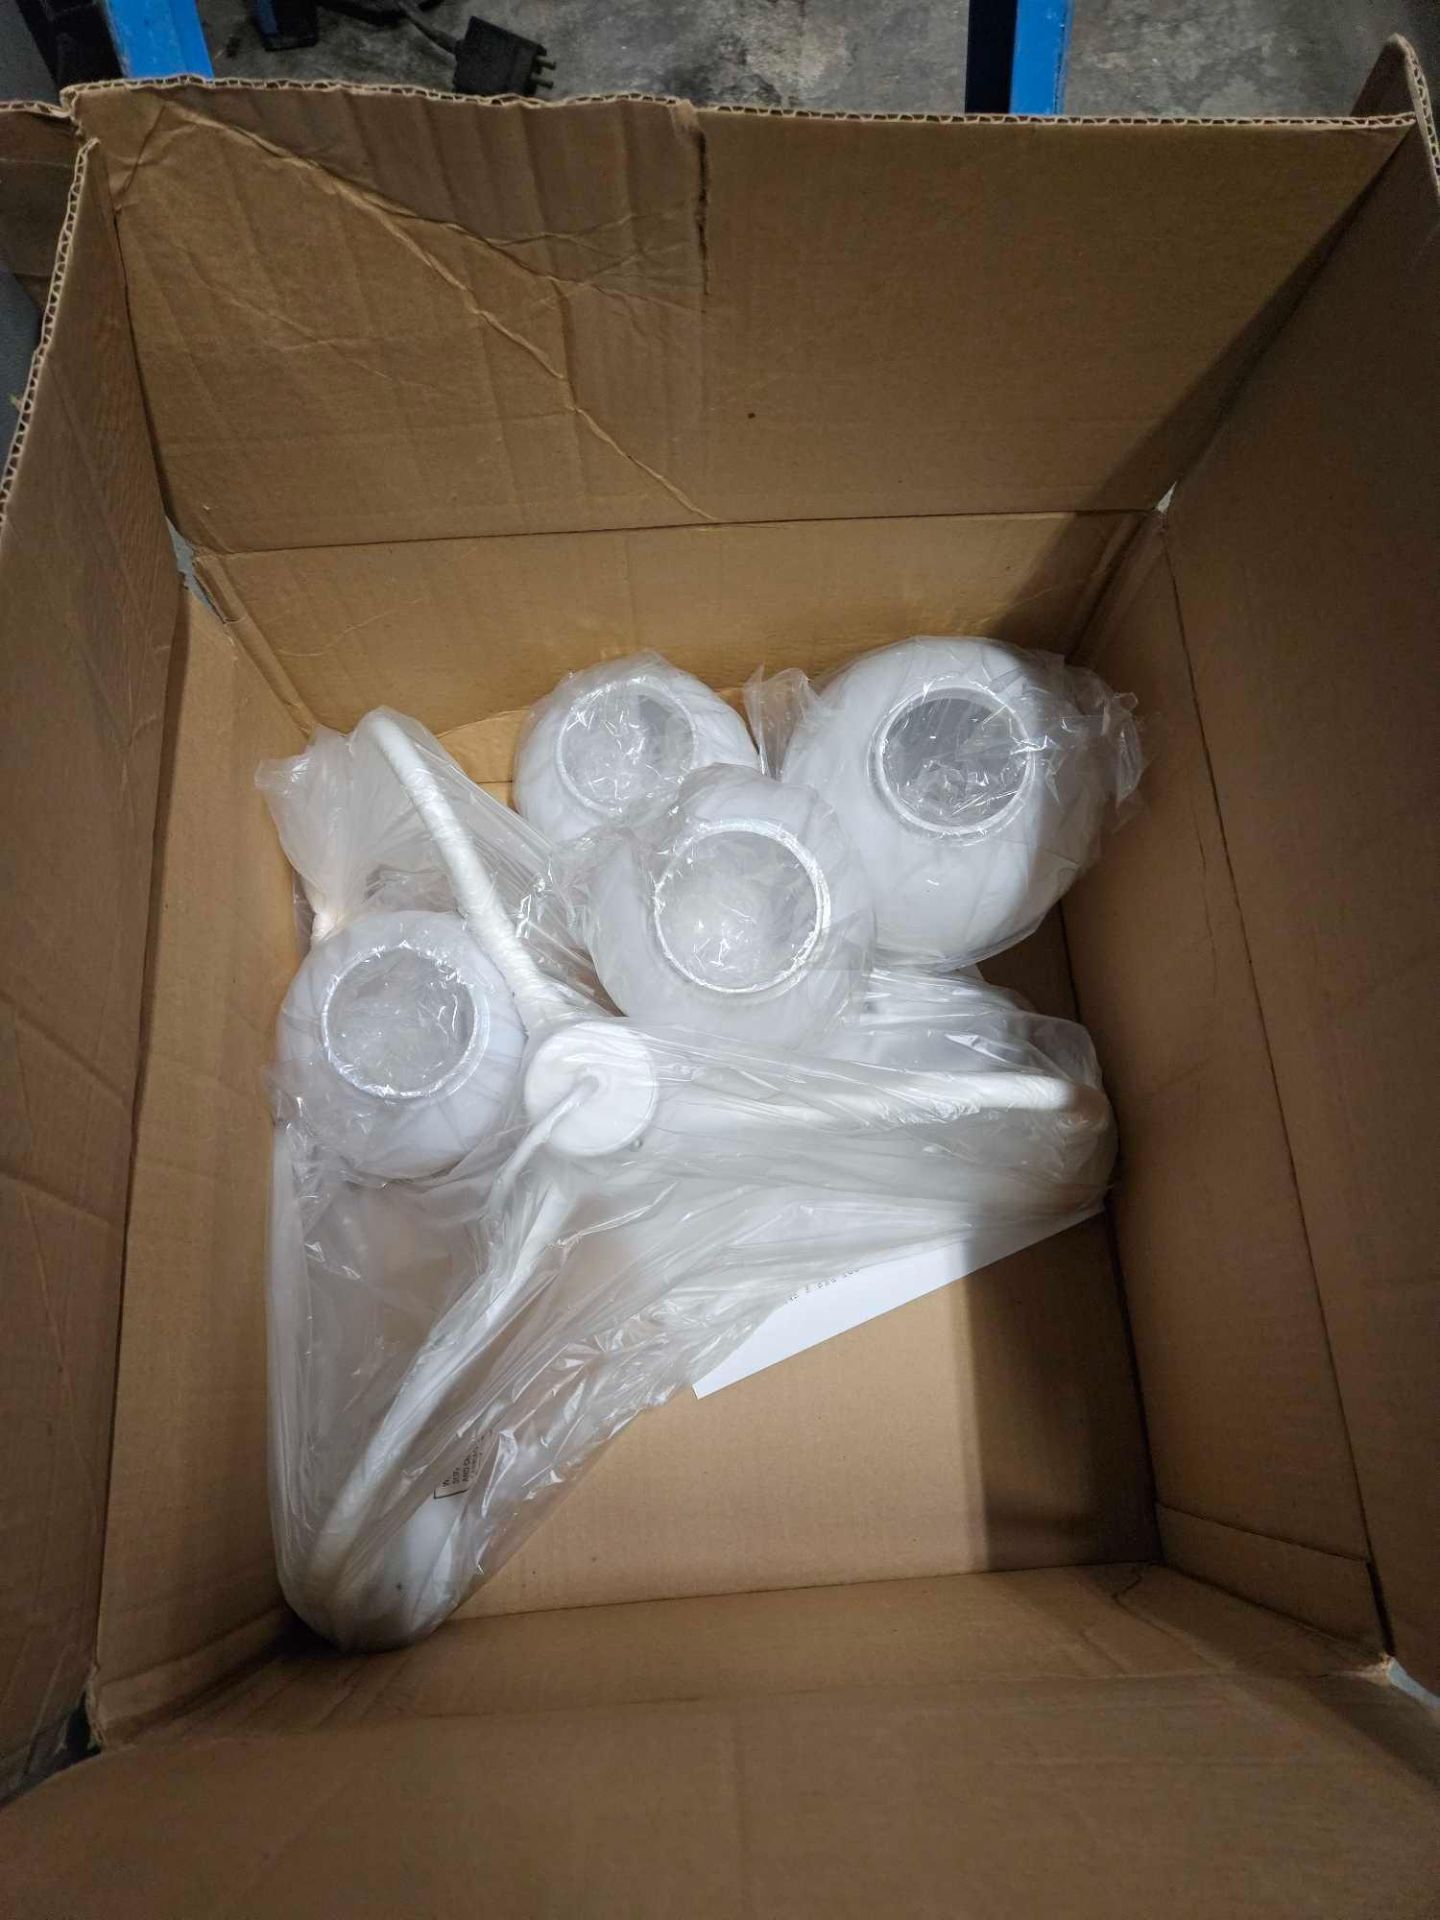 Lot of (2) 4 globe light fixtures, (NEW IN BOX) - Image 2 of 2